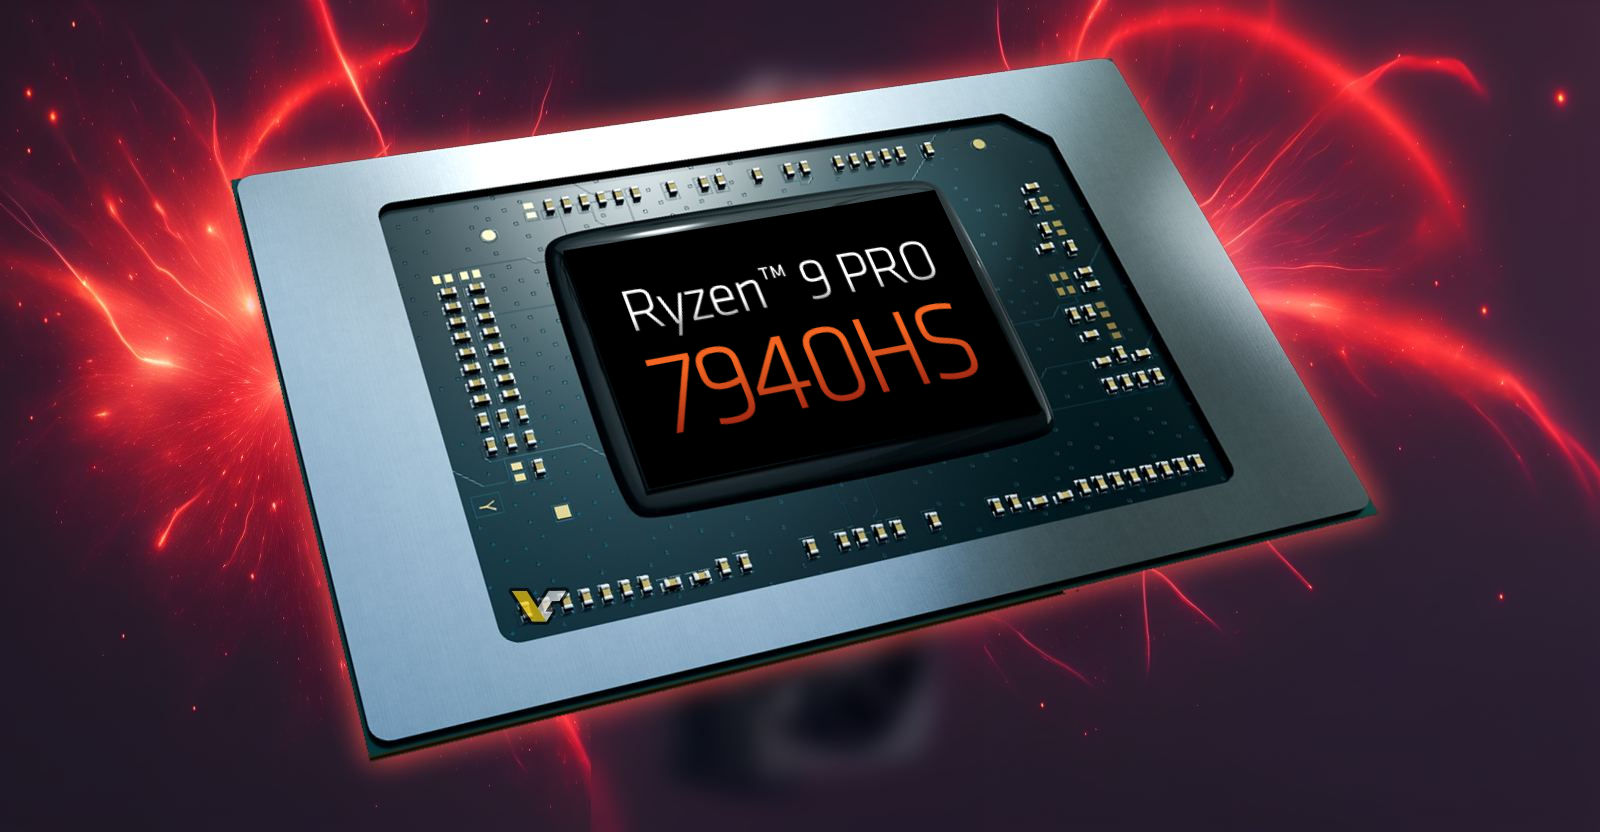 AMD Ryzen 9 PRO 7940HS Phoenix APU for businesses has been spotted 